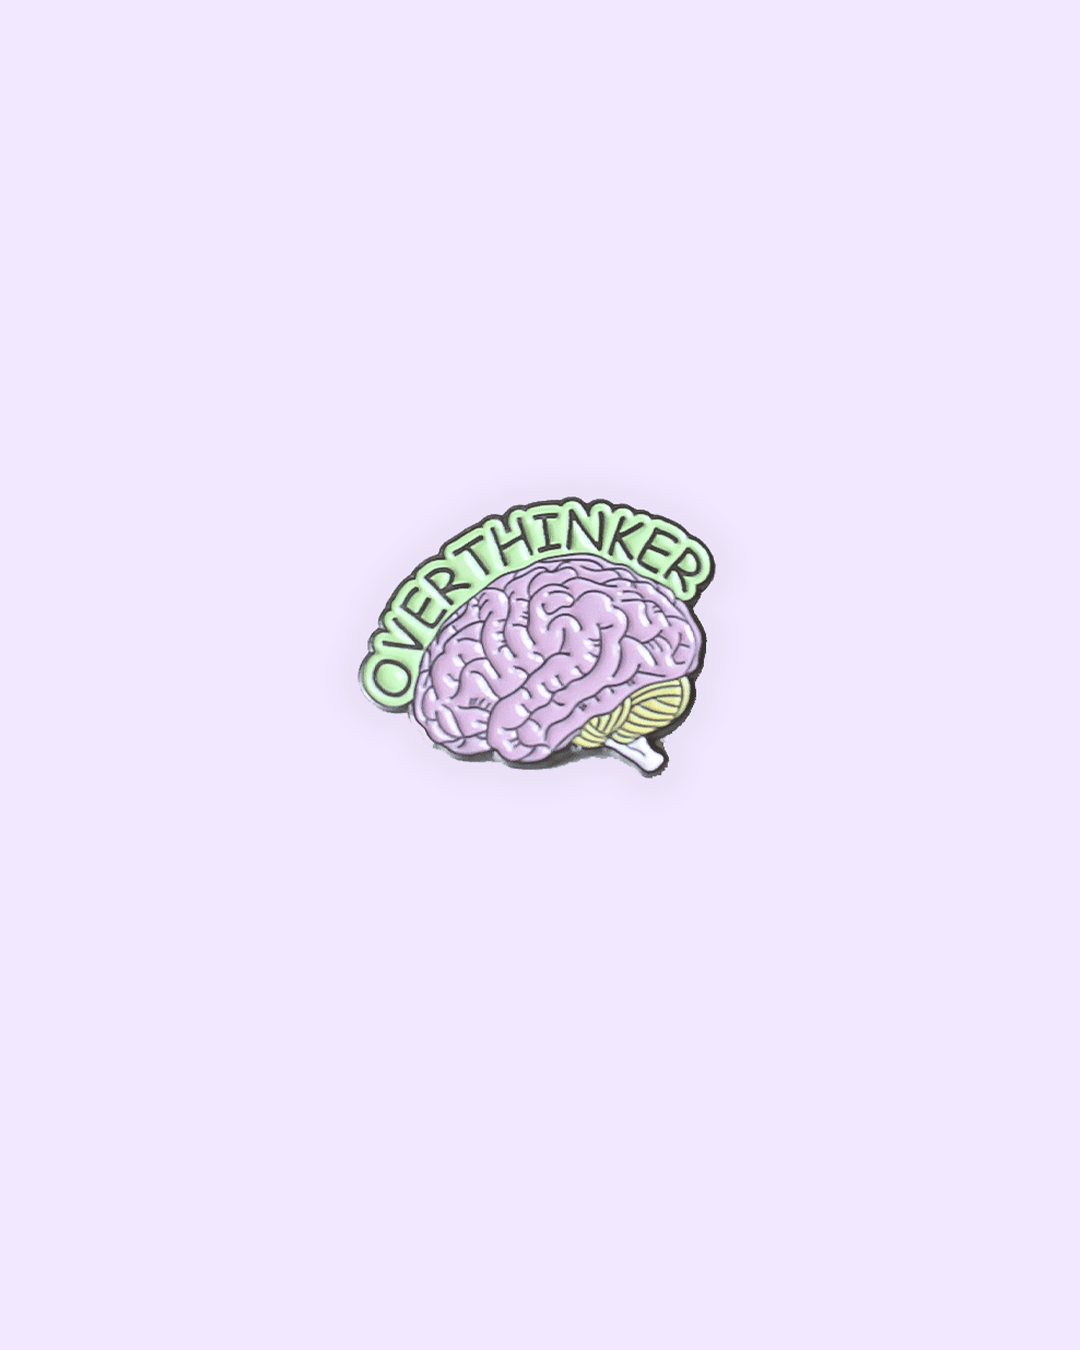 Overthinker Anxiety Pin Badge - Funny Mental Health Pin Badge - Overthinker Pin Badge